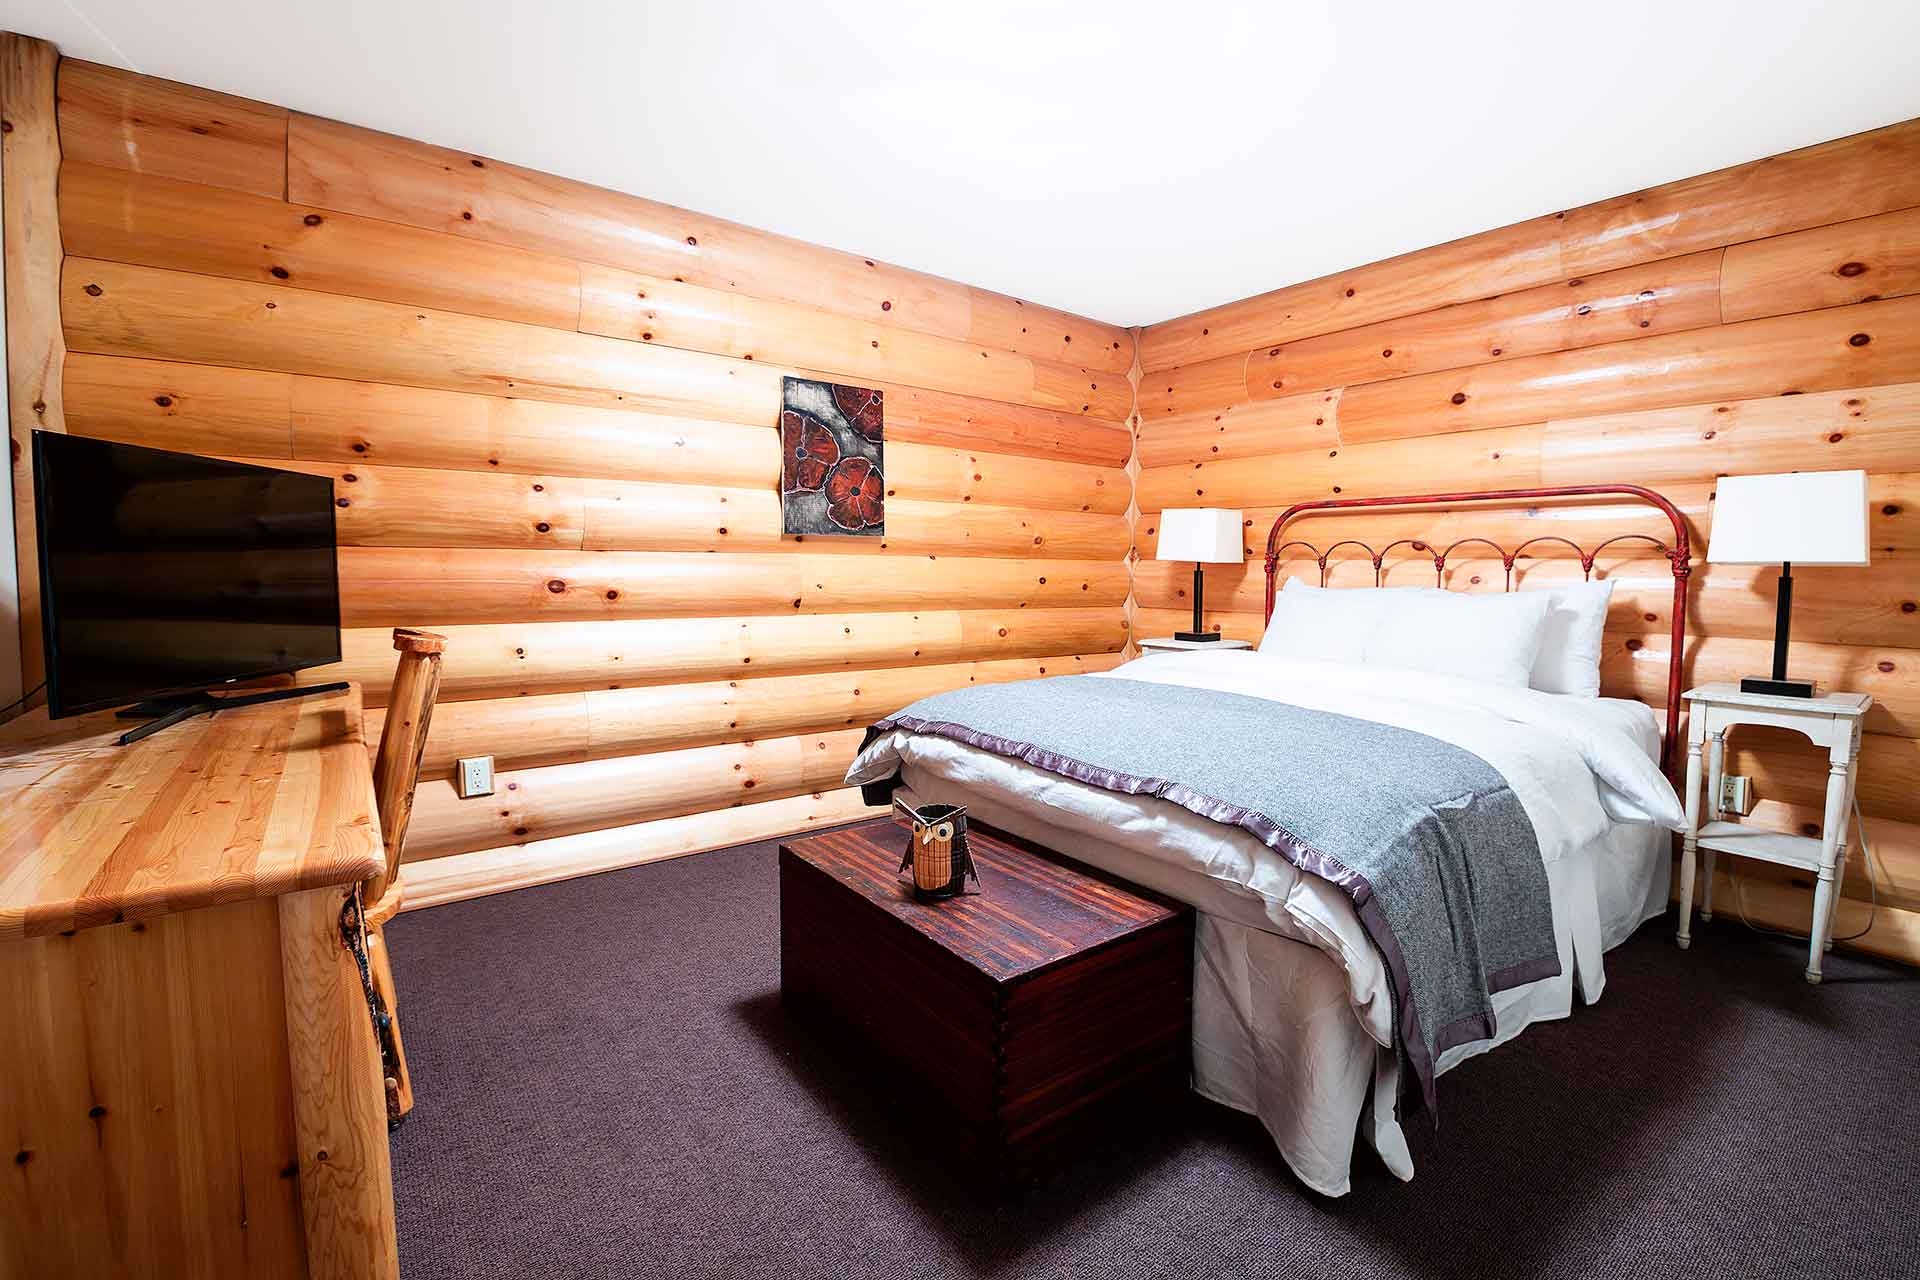 LAGC UNIT 2 UPSTAIRS BEDROOM WITH LOG PANELING ON THE WALLS AND A QUEEN BED